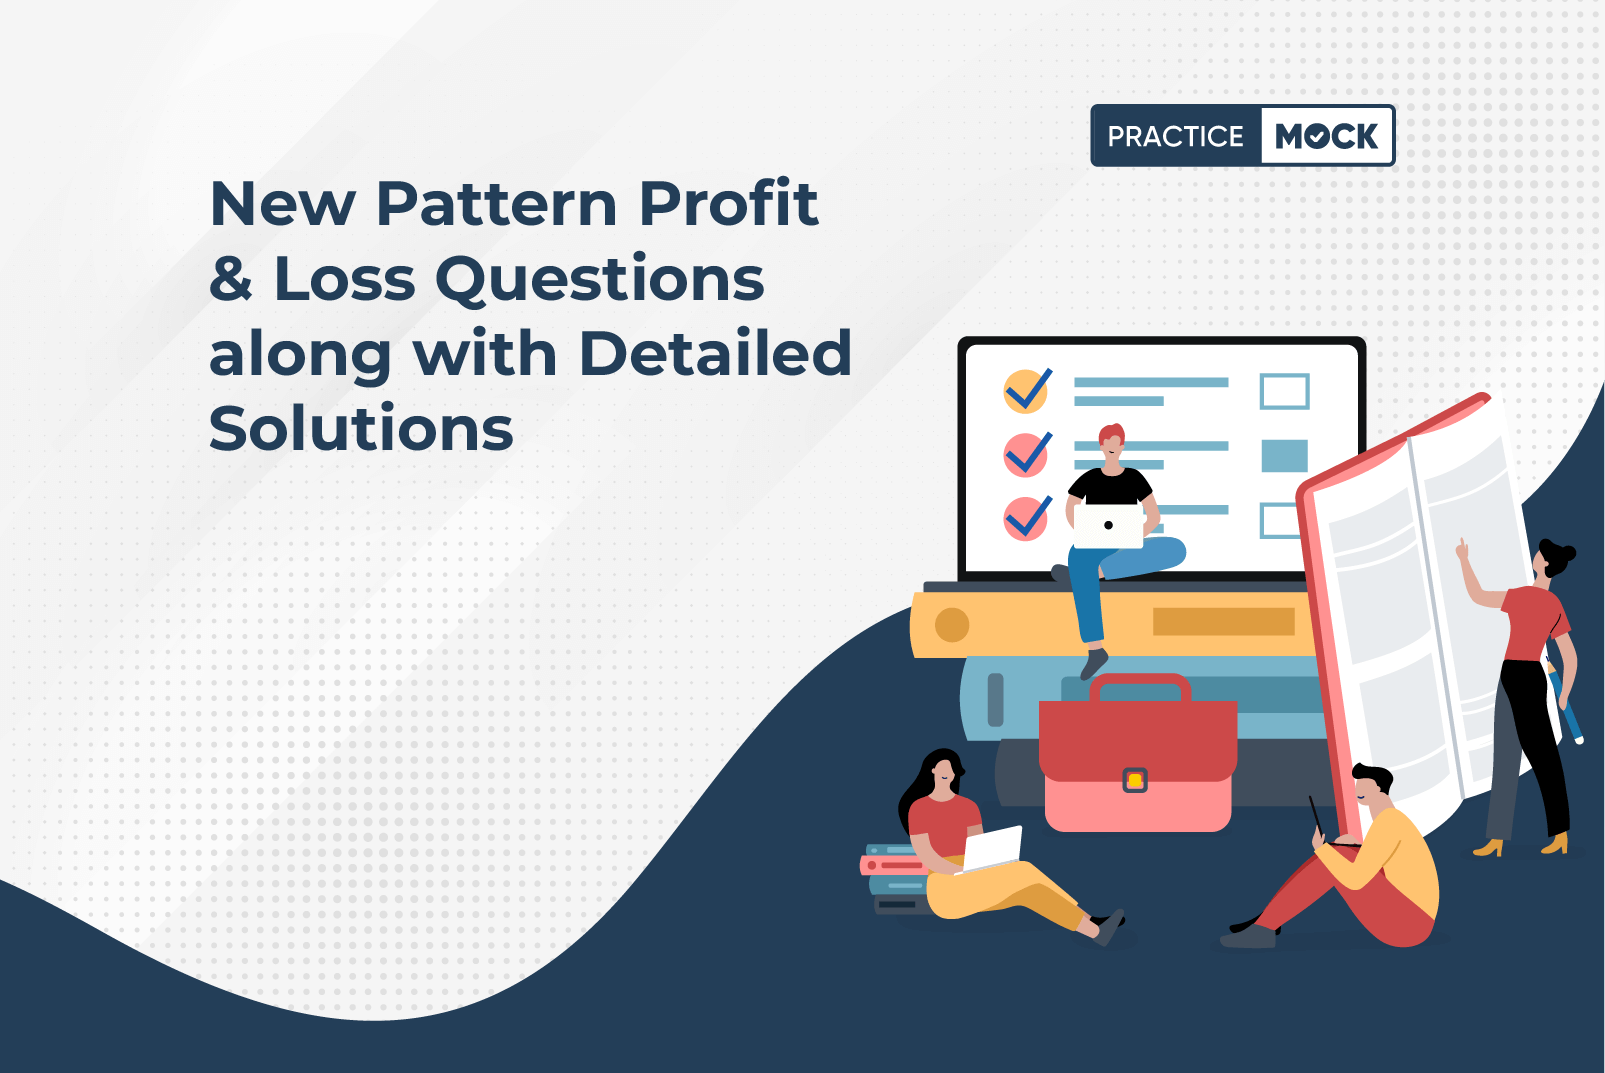 New Pattern Profit & Loss Questions along with Detailed Solutions